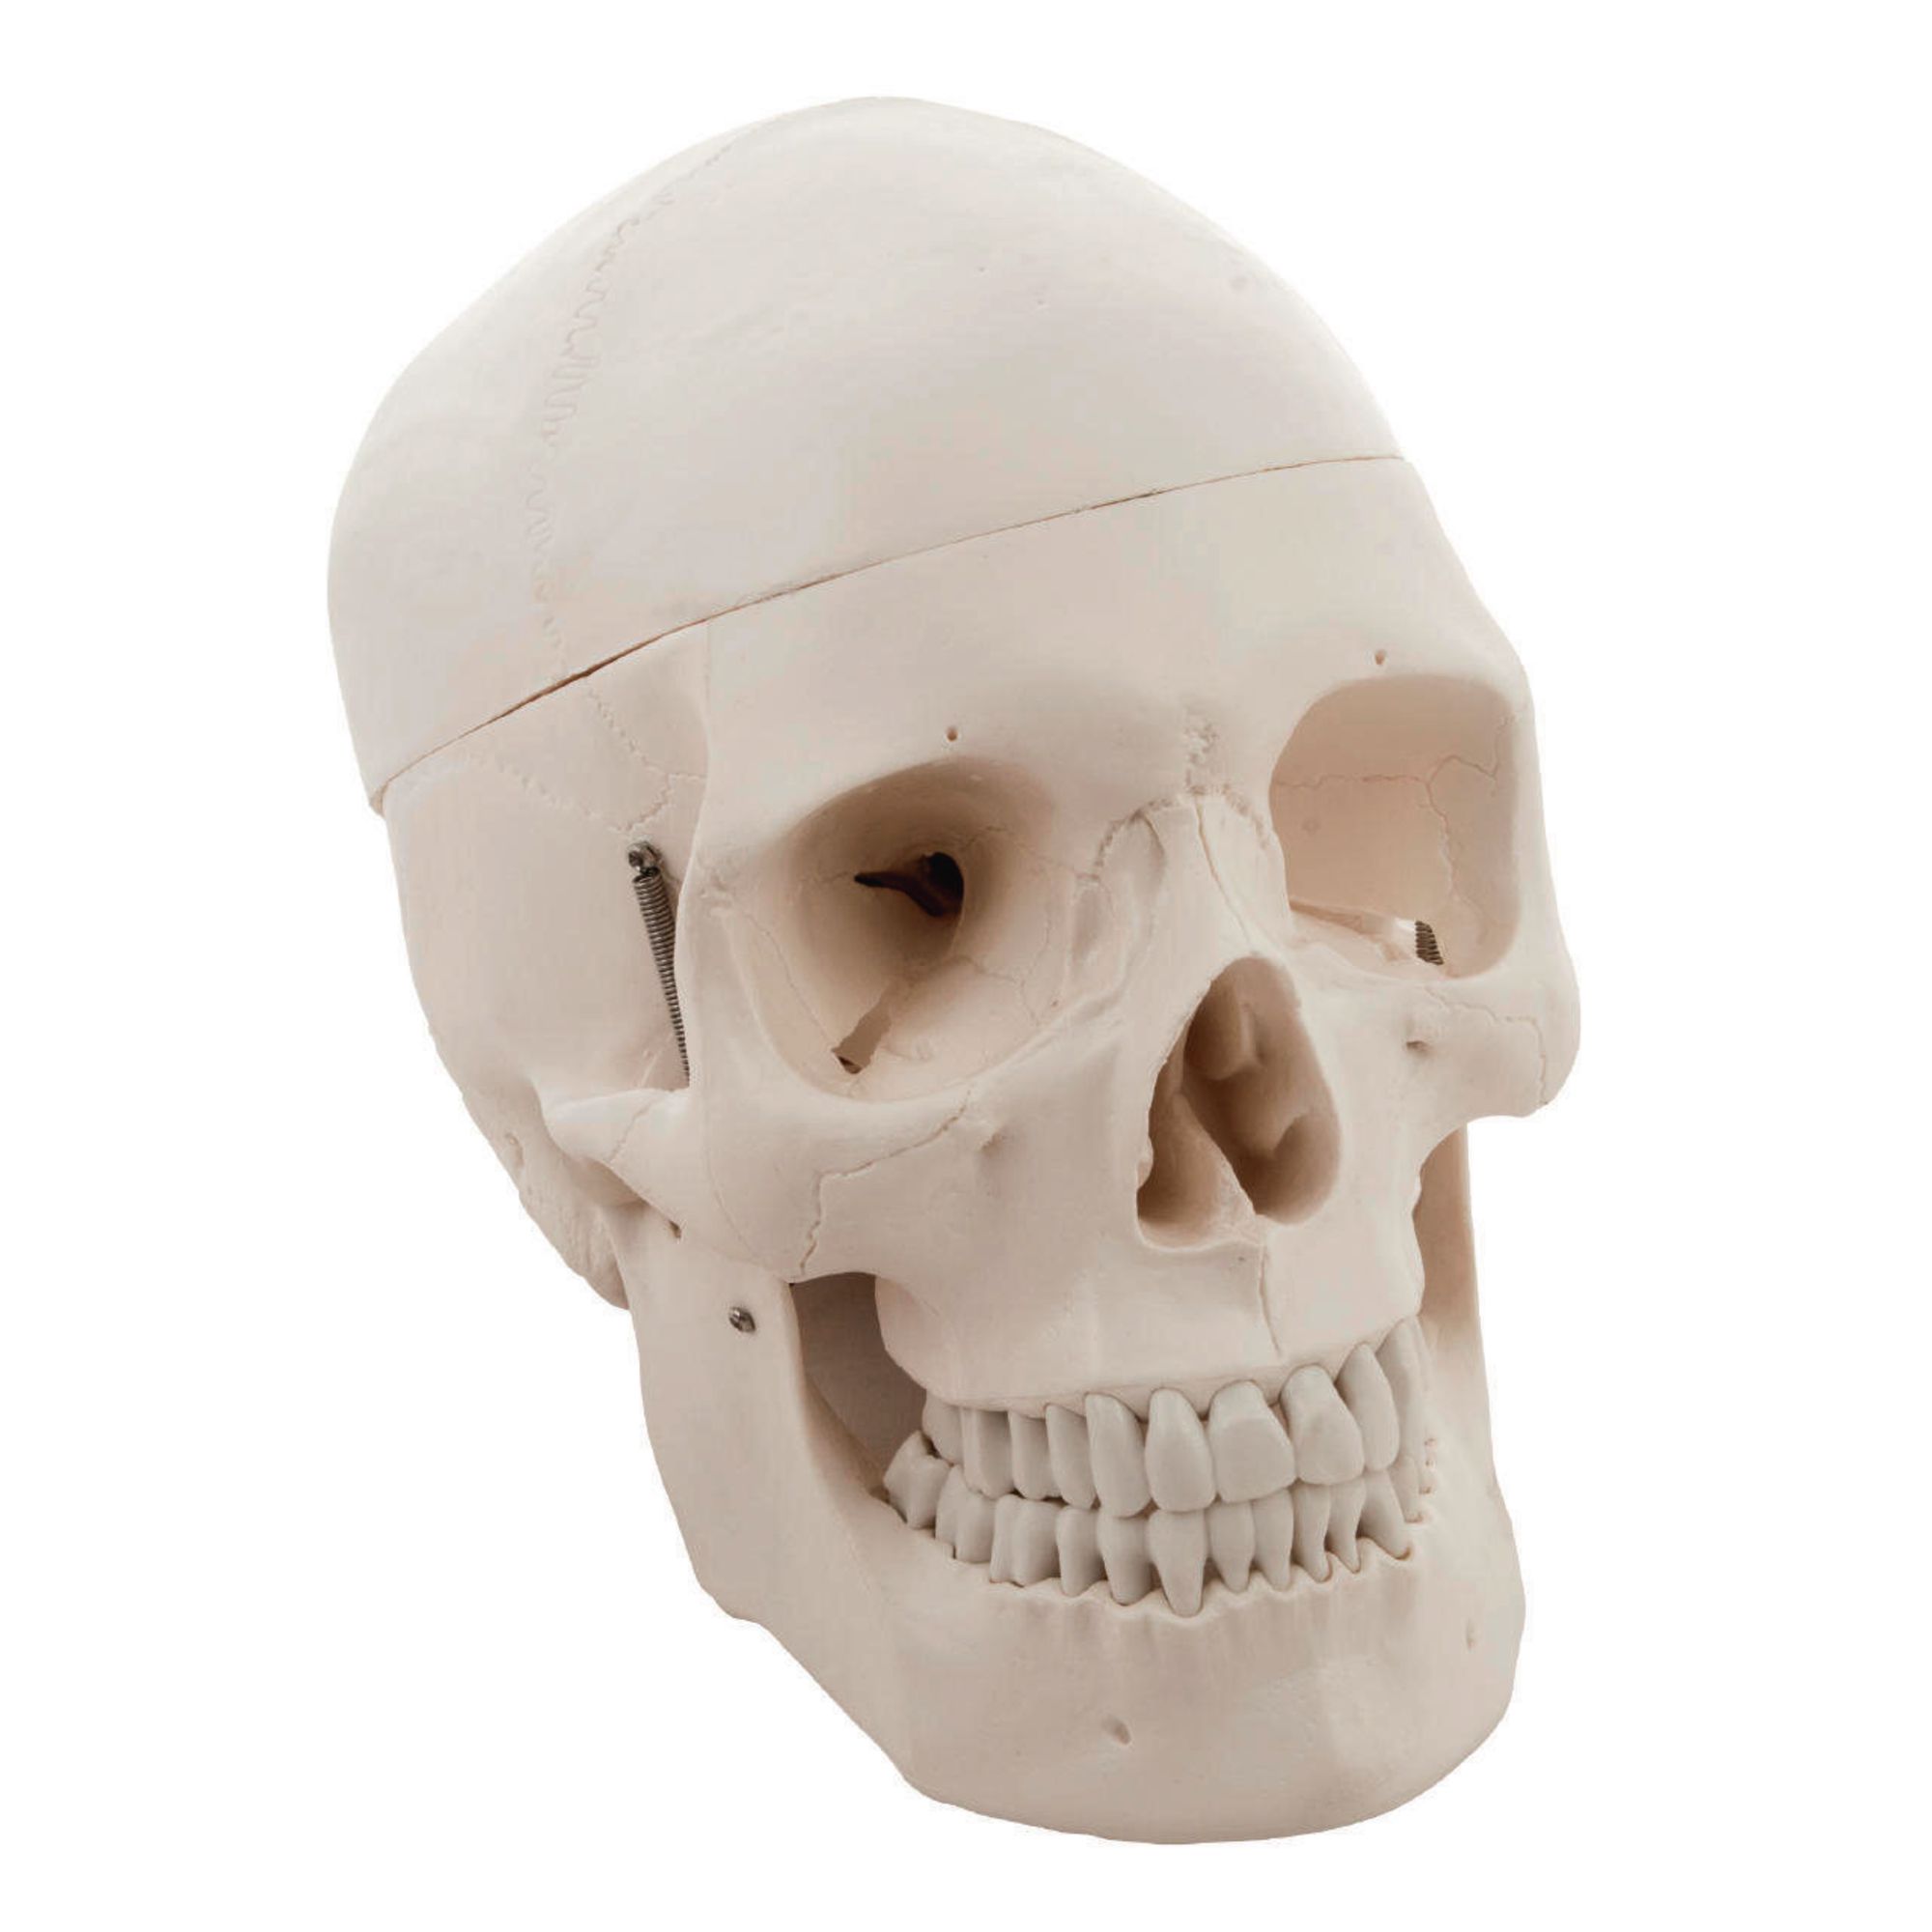 Removable Skull Cap and Articulated Mandible Life Size 3-parts numbered Skull Model with Full Set of Teeth Detailed Product Poster Includes 